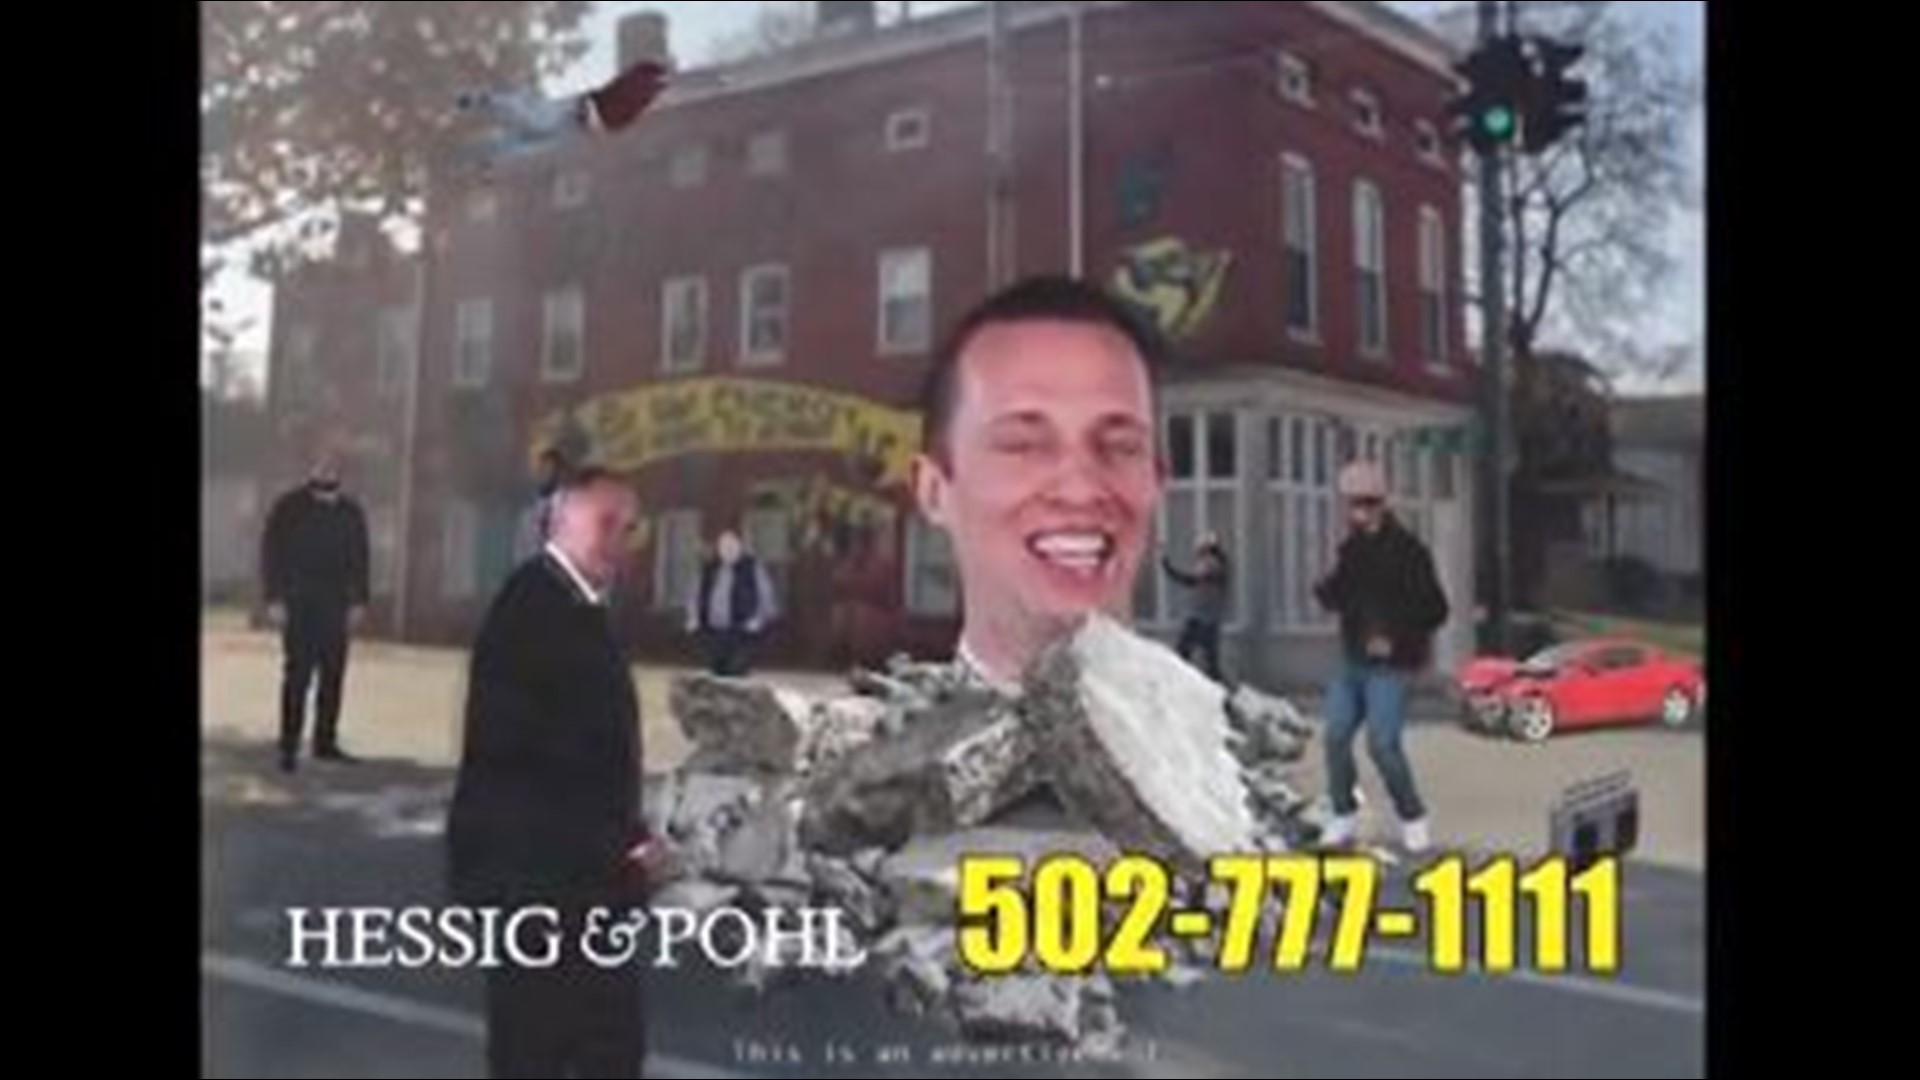 To contact Hessig & Pohl Injury Lawyers, call 502-777-1111 or go to HessigAndPohl.com.